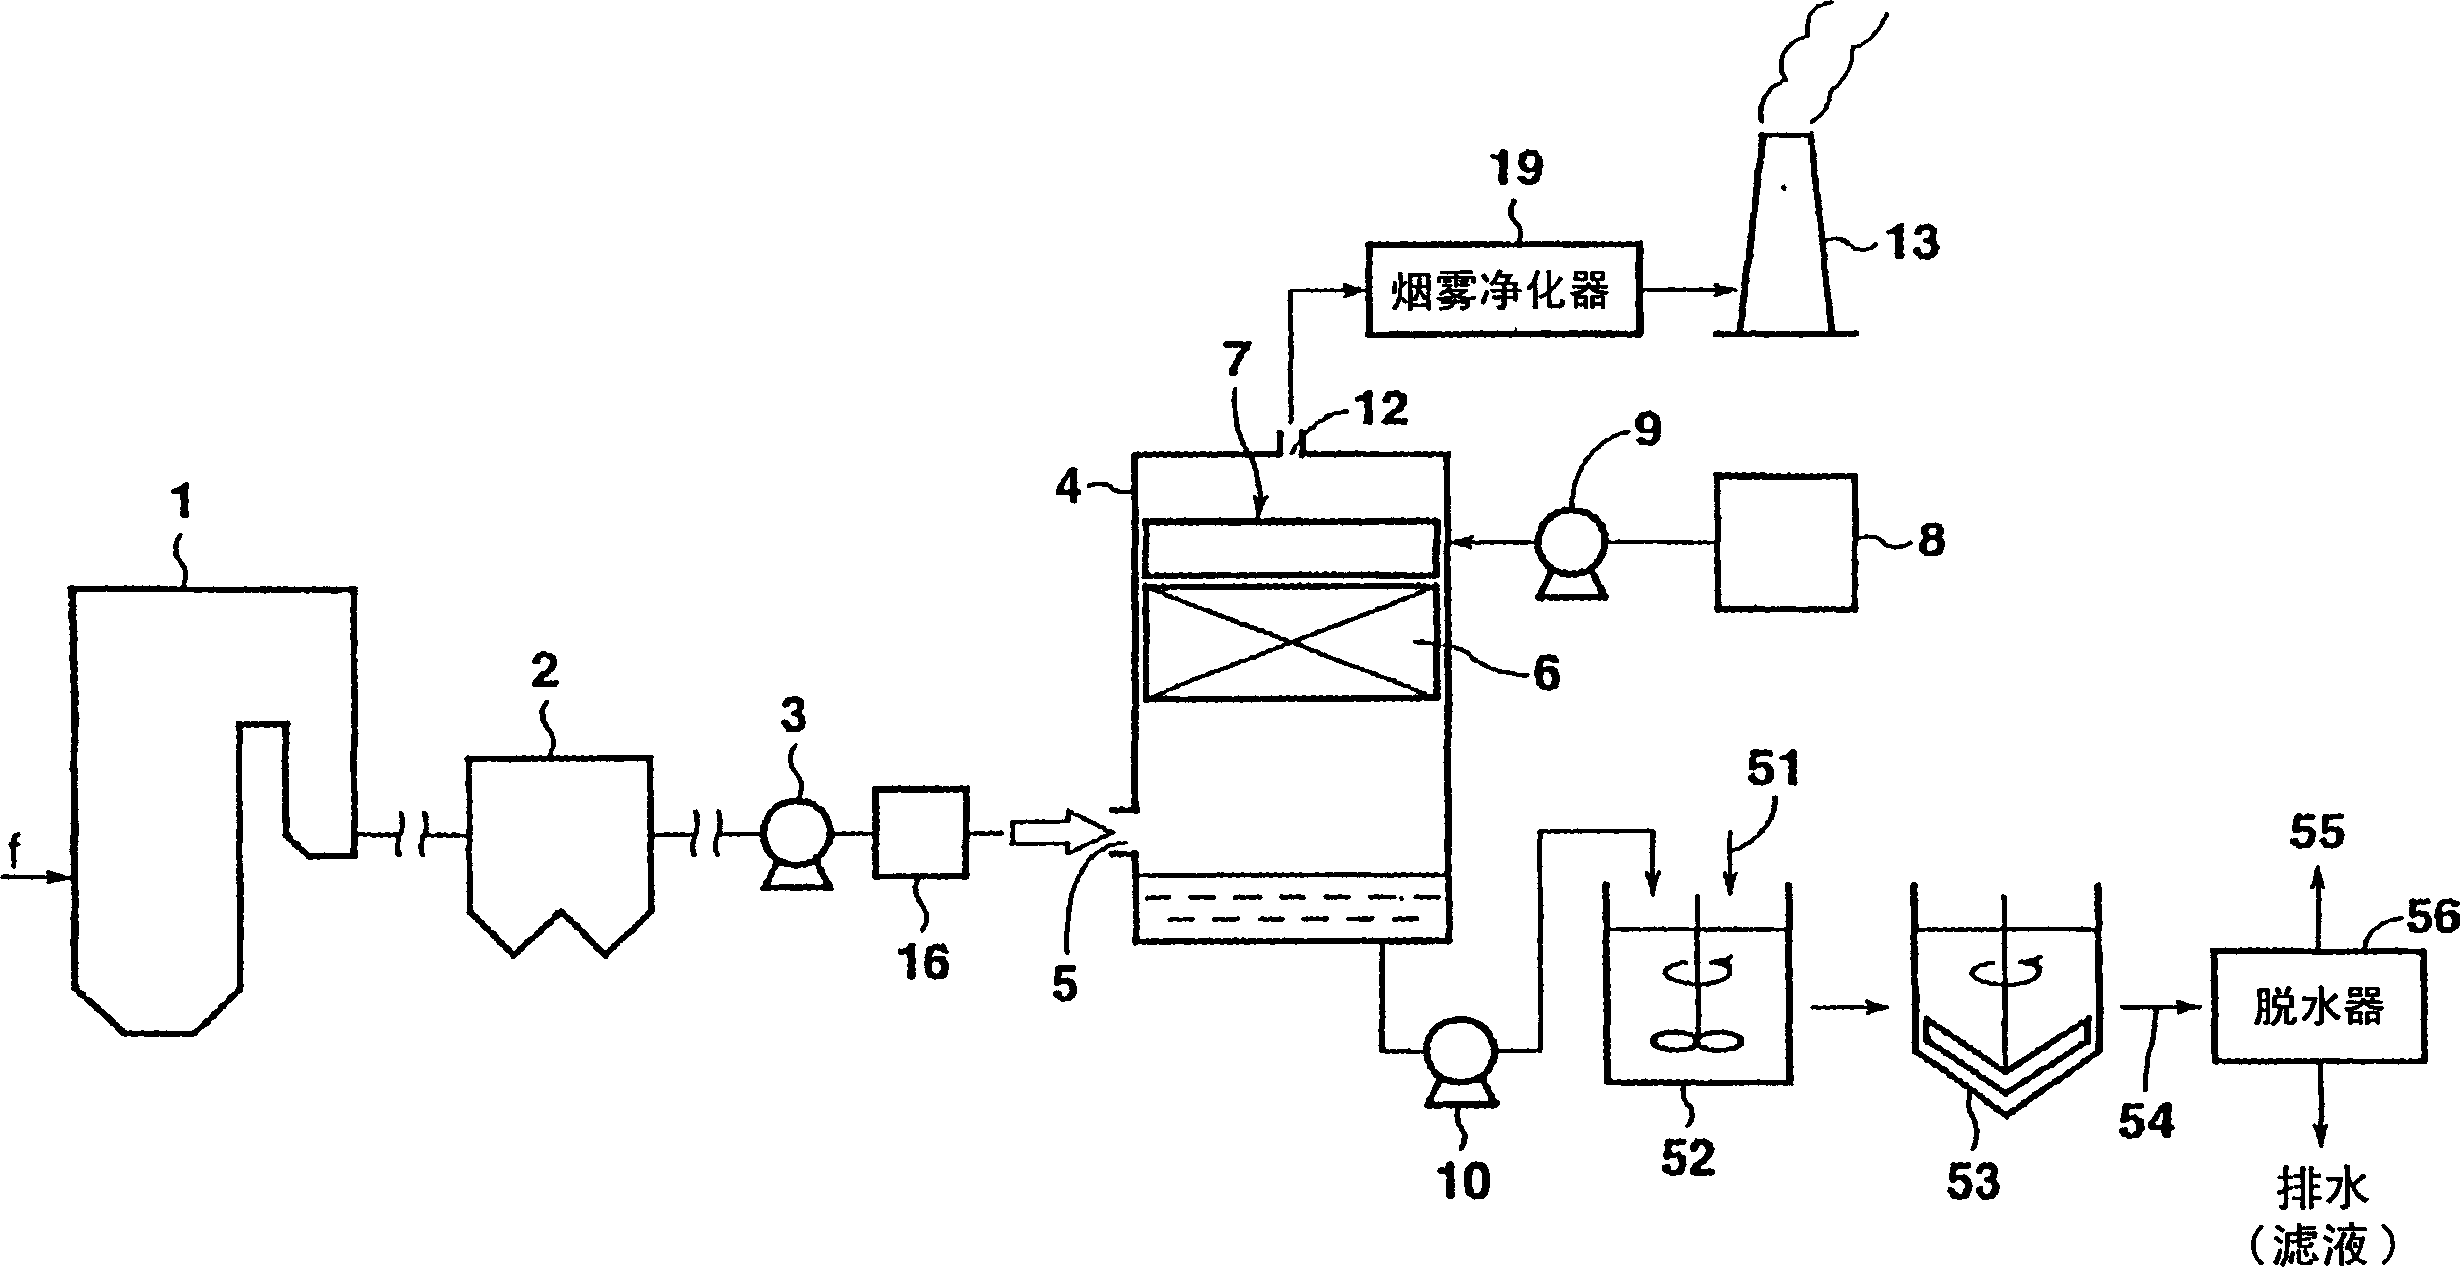 Flue gas desulfurization apparatus, flue gas desulfurization system, and method for operating flue gas desulfurization apparatus